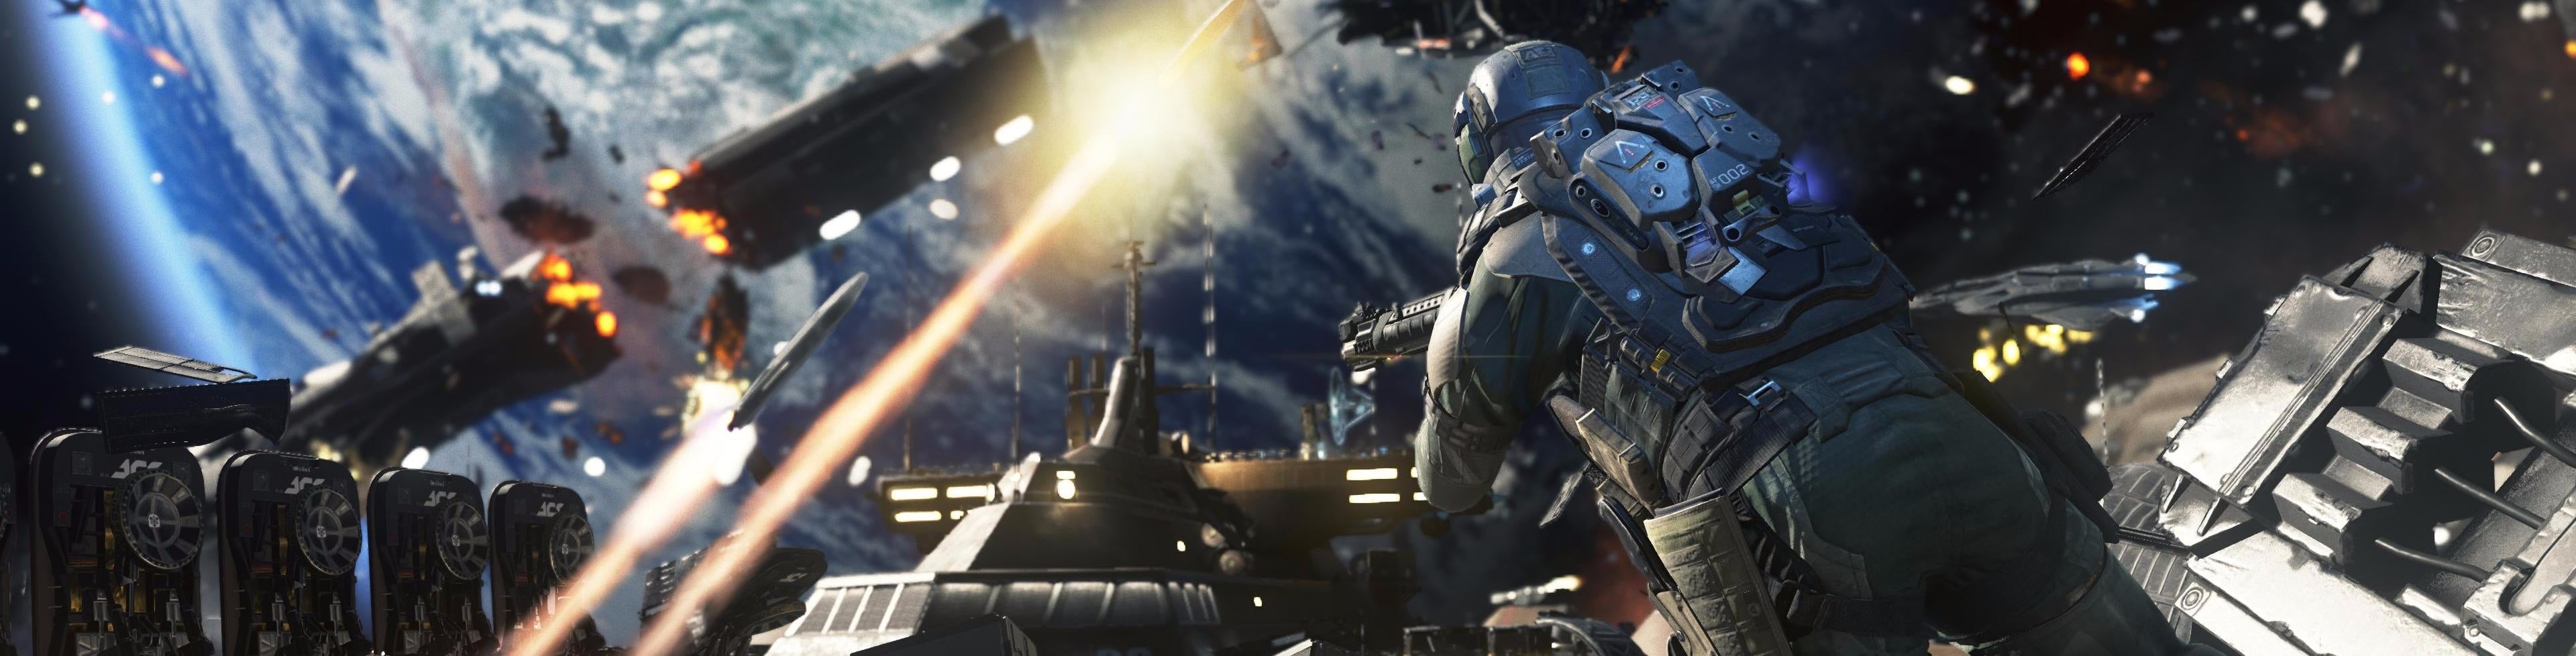 Image for Call of Duty: Infinite Warfare review